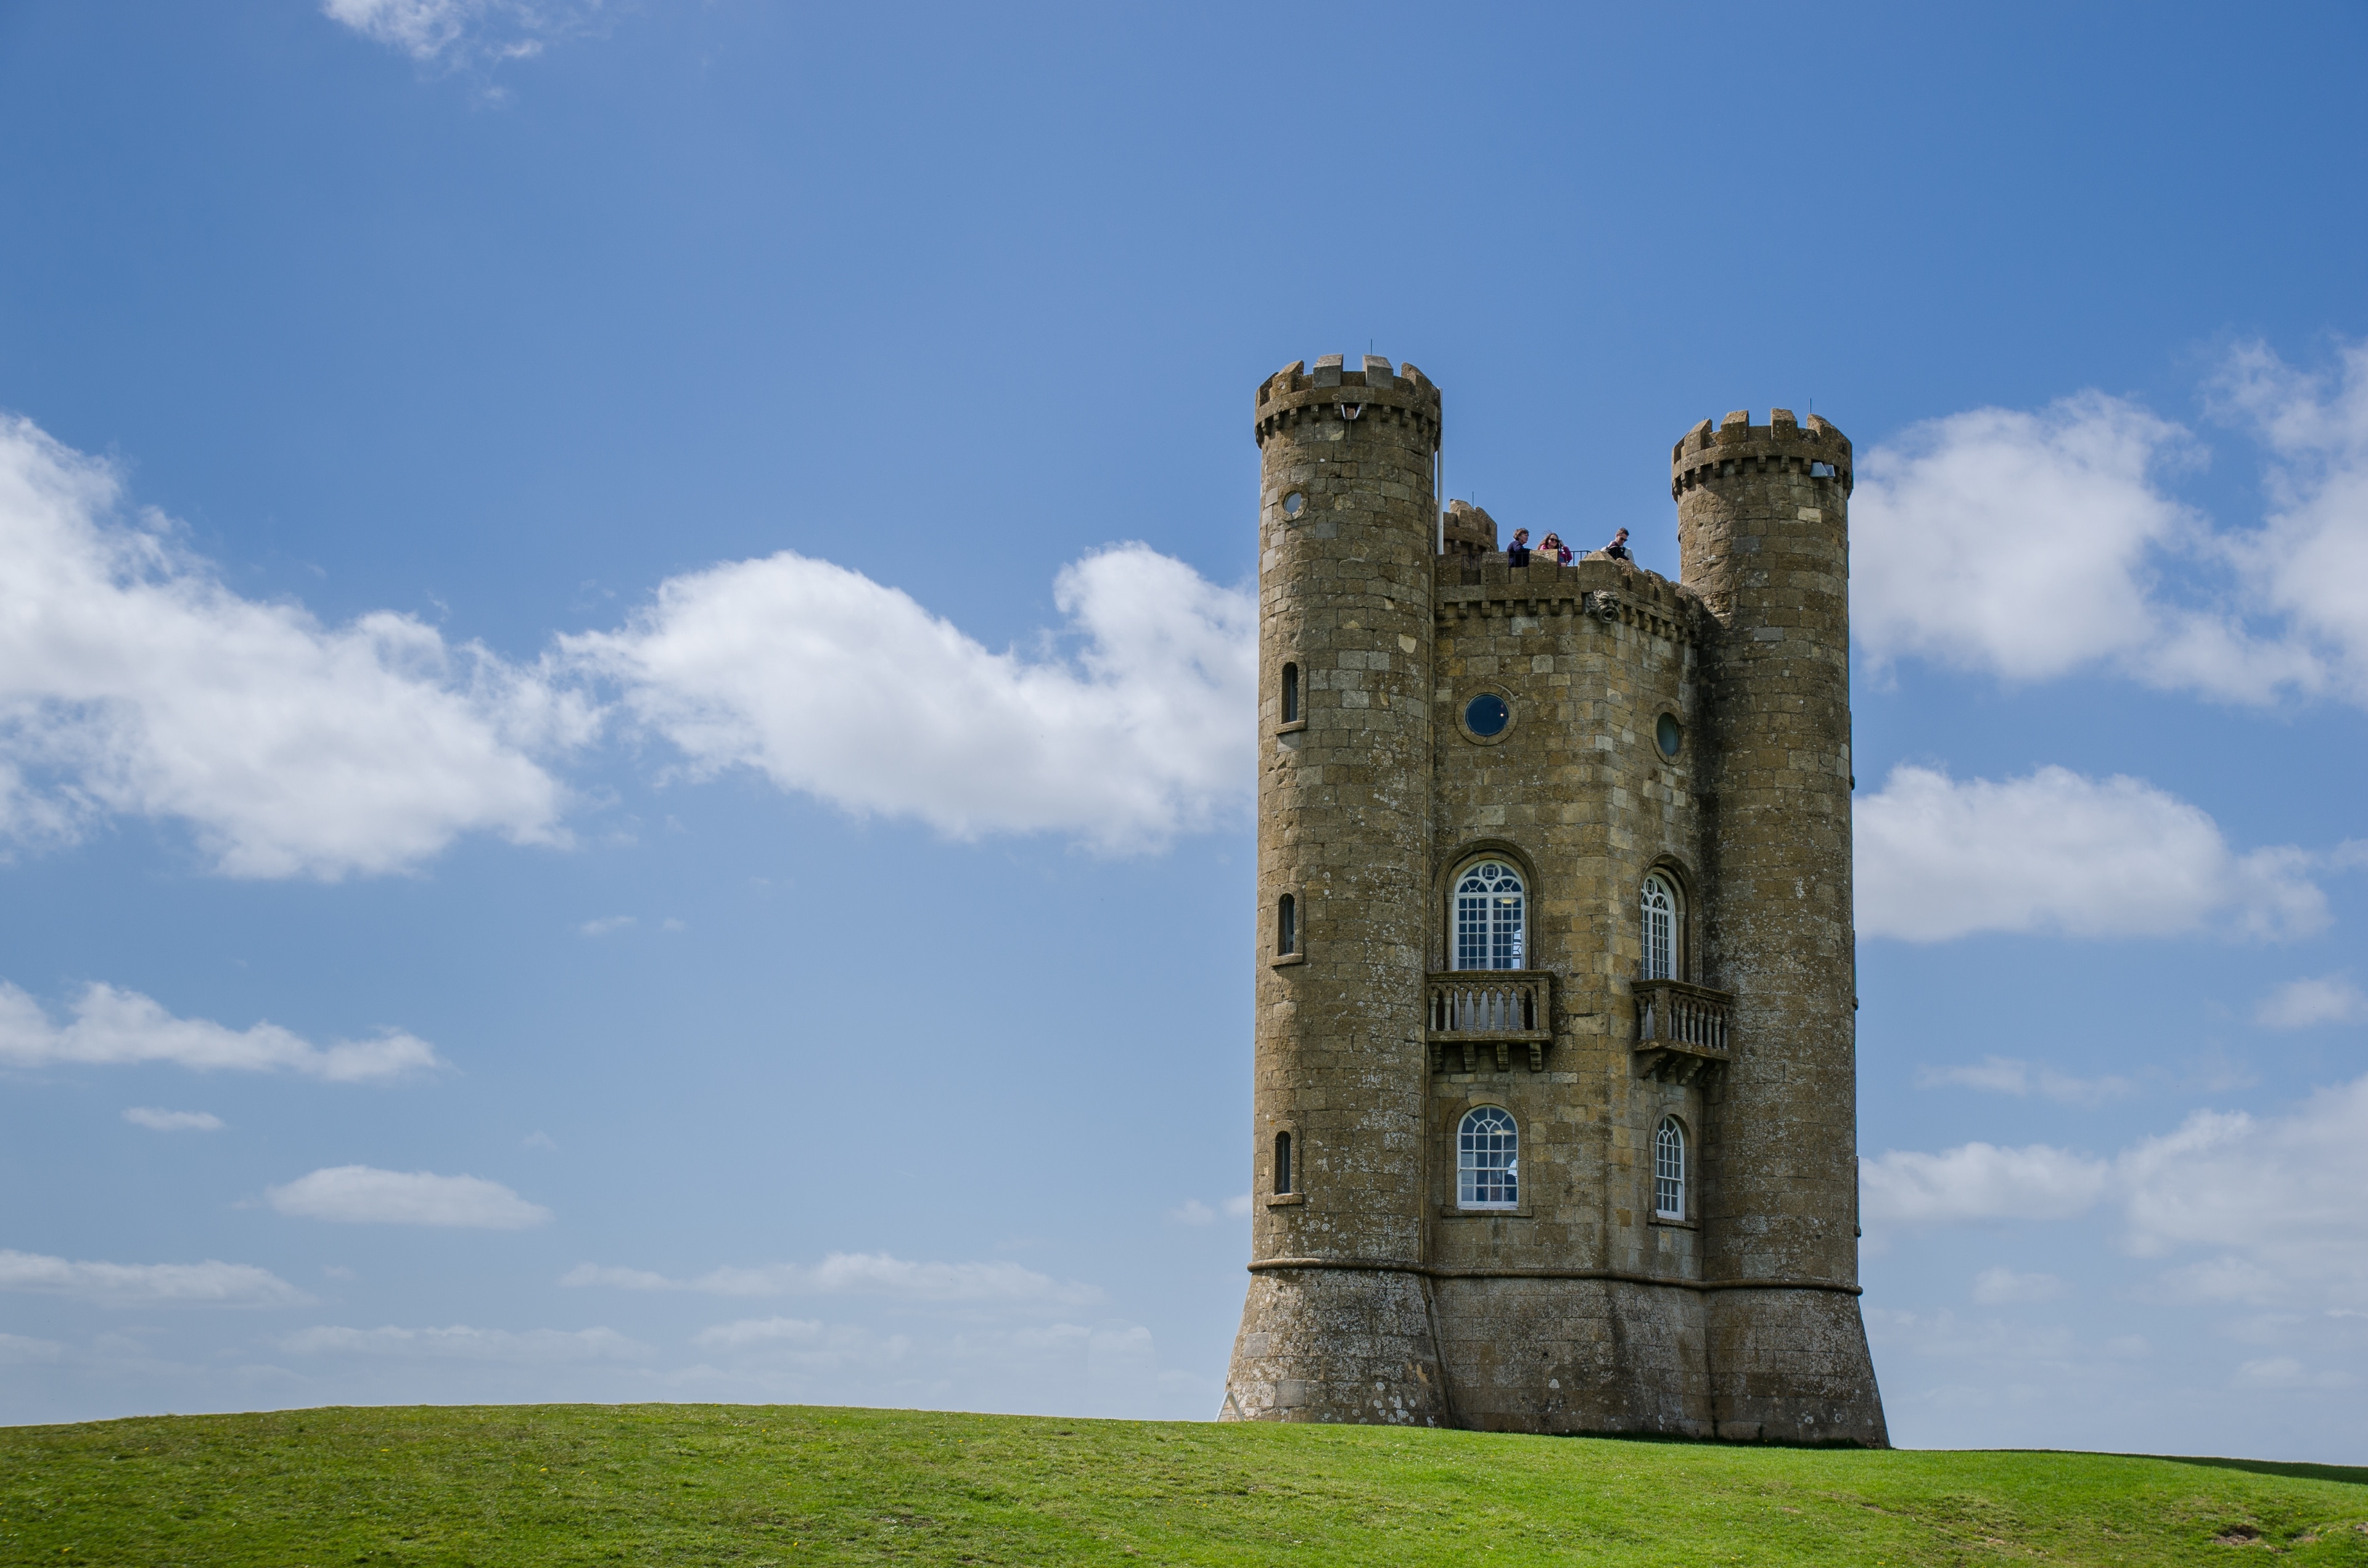 Broadway Tower Wikidata has entry Q208234 with data related to this item.